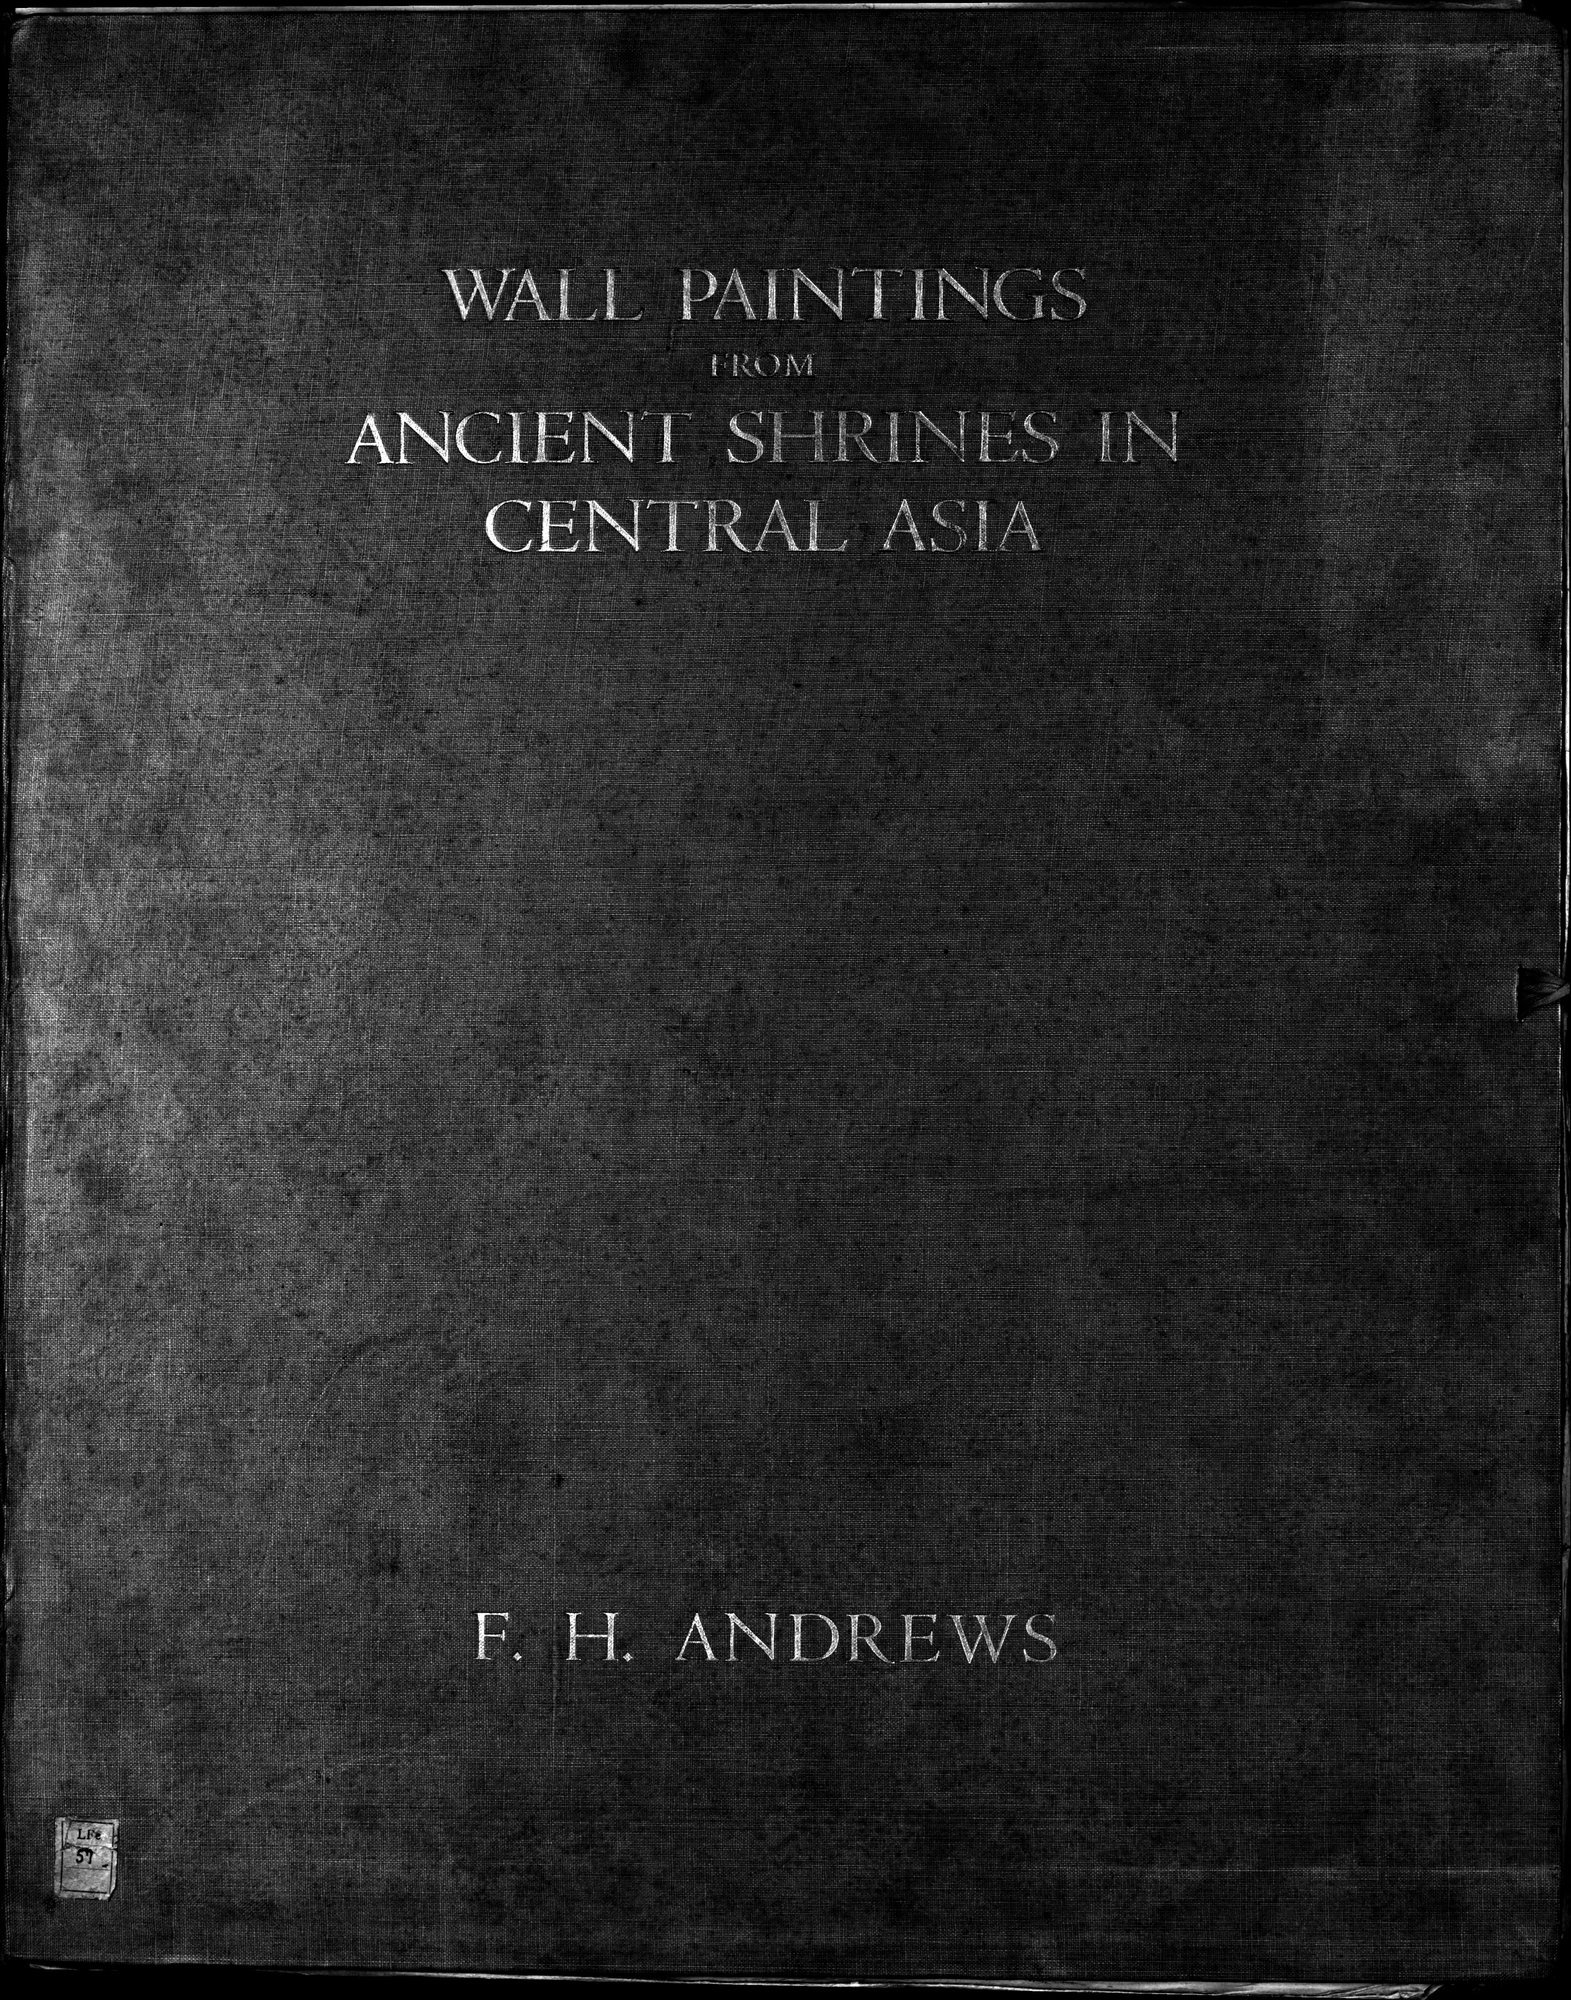 Wall Paintings from Ancient Shrines in Central Asia : vol.2 / Page 1 (Grayscale High Resolution Image)